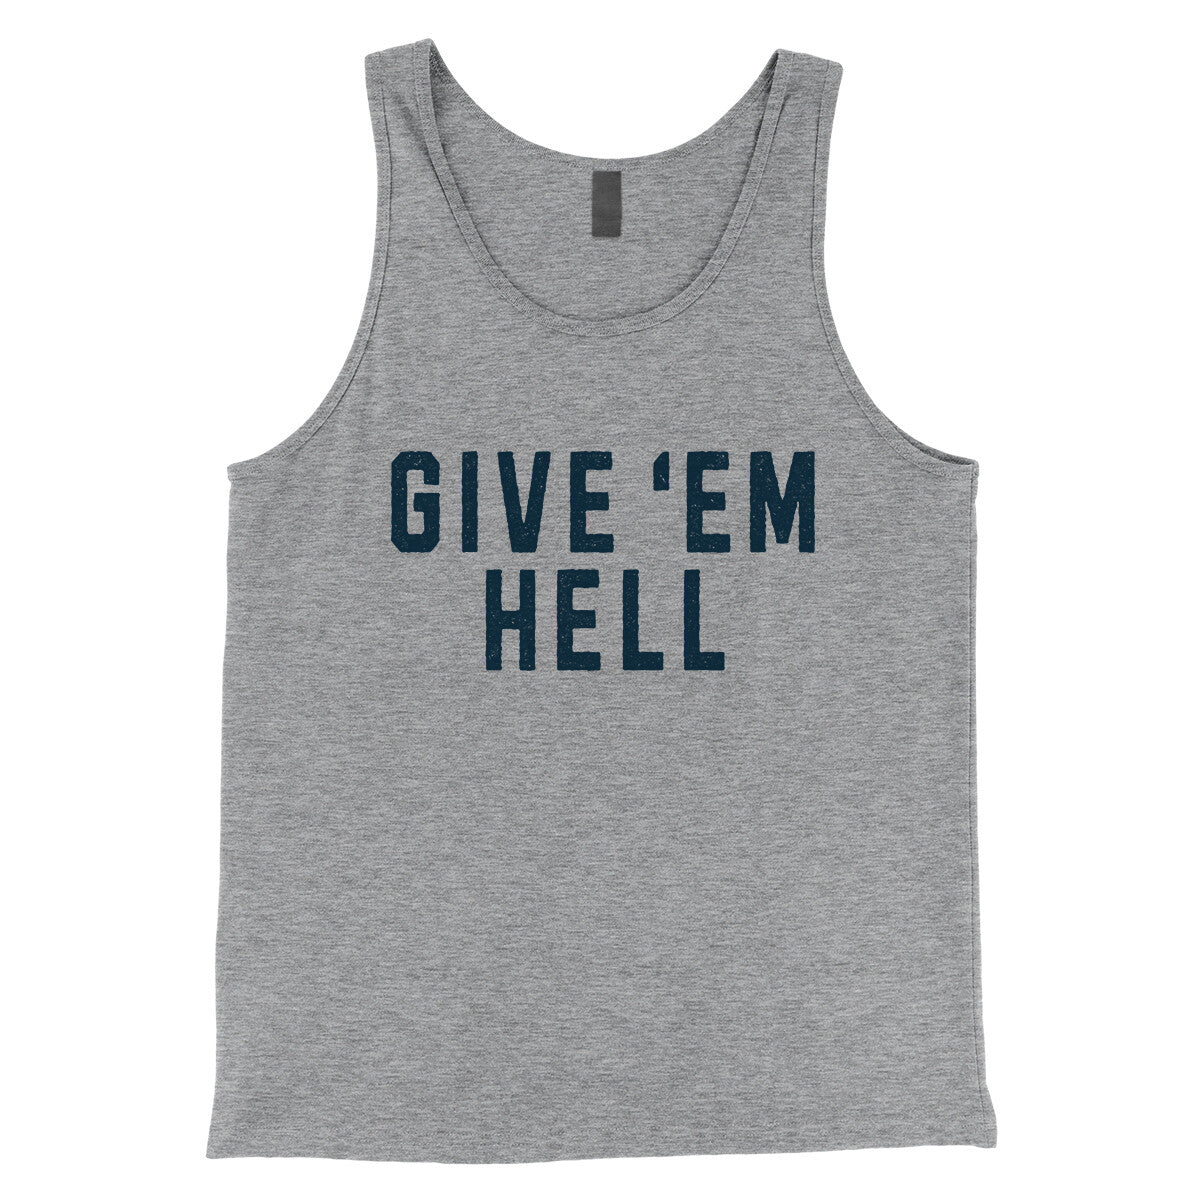 Give ‘em Hell in Athletic Heather Color